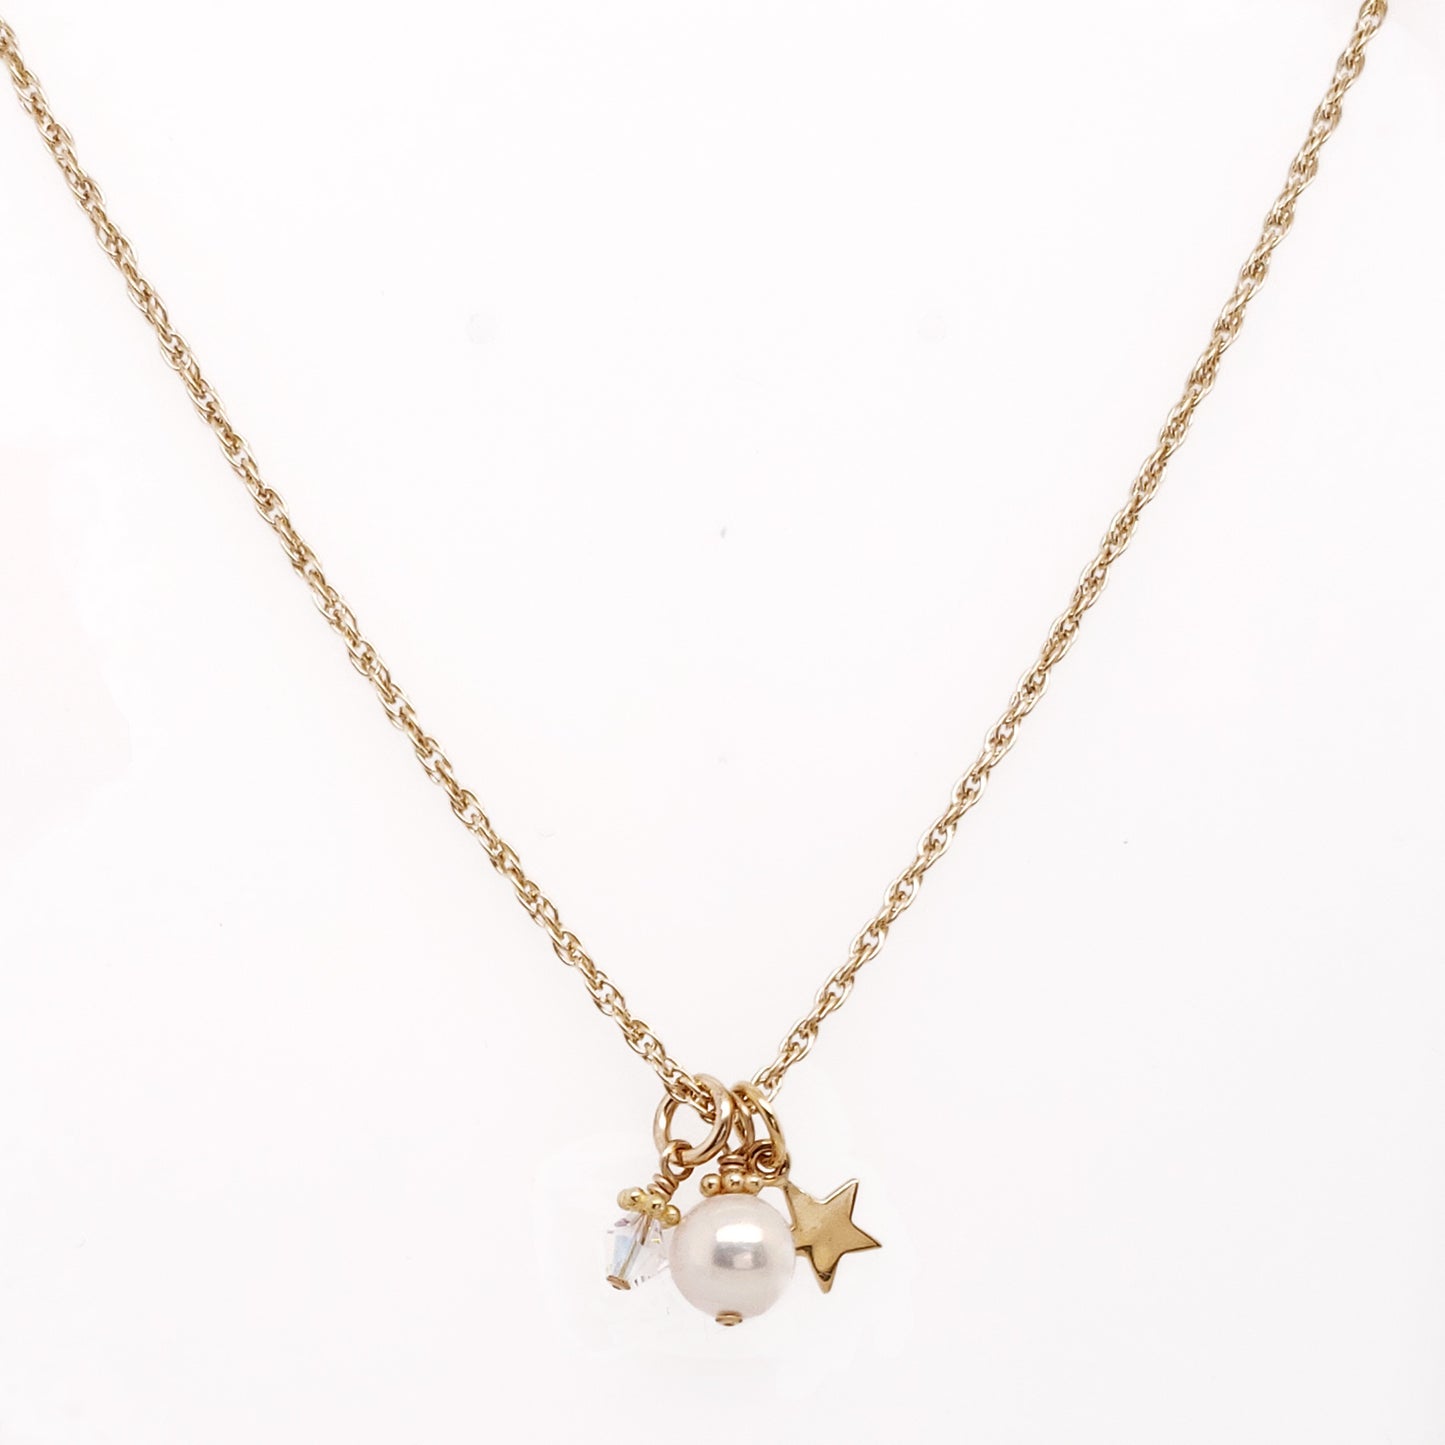 Wish on a Star Necklace in Gold-Filled - Little Girl's Pearls